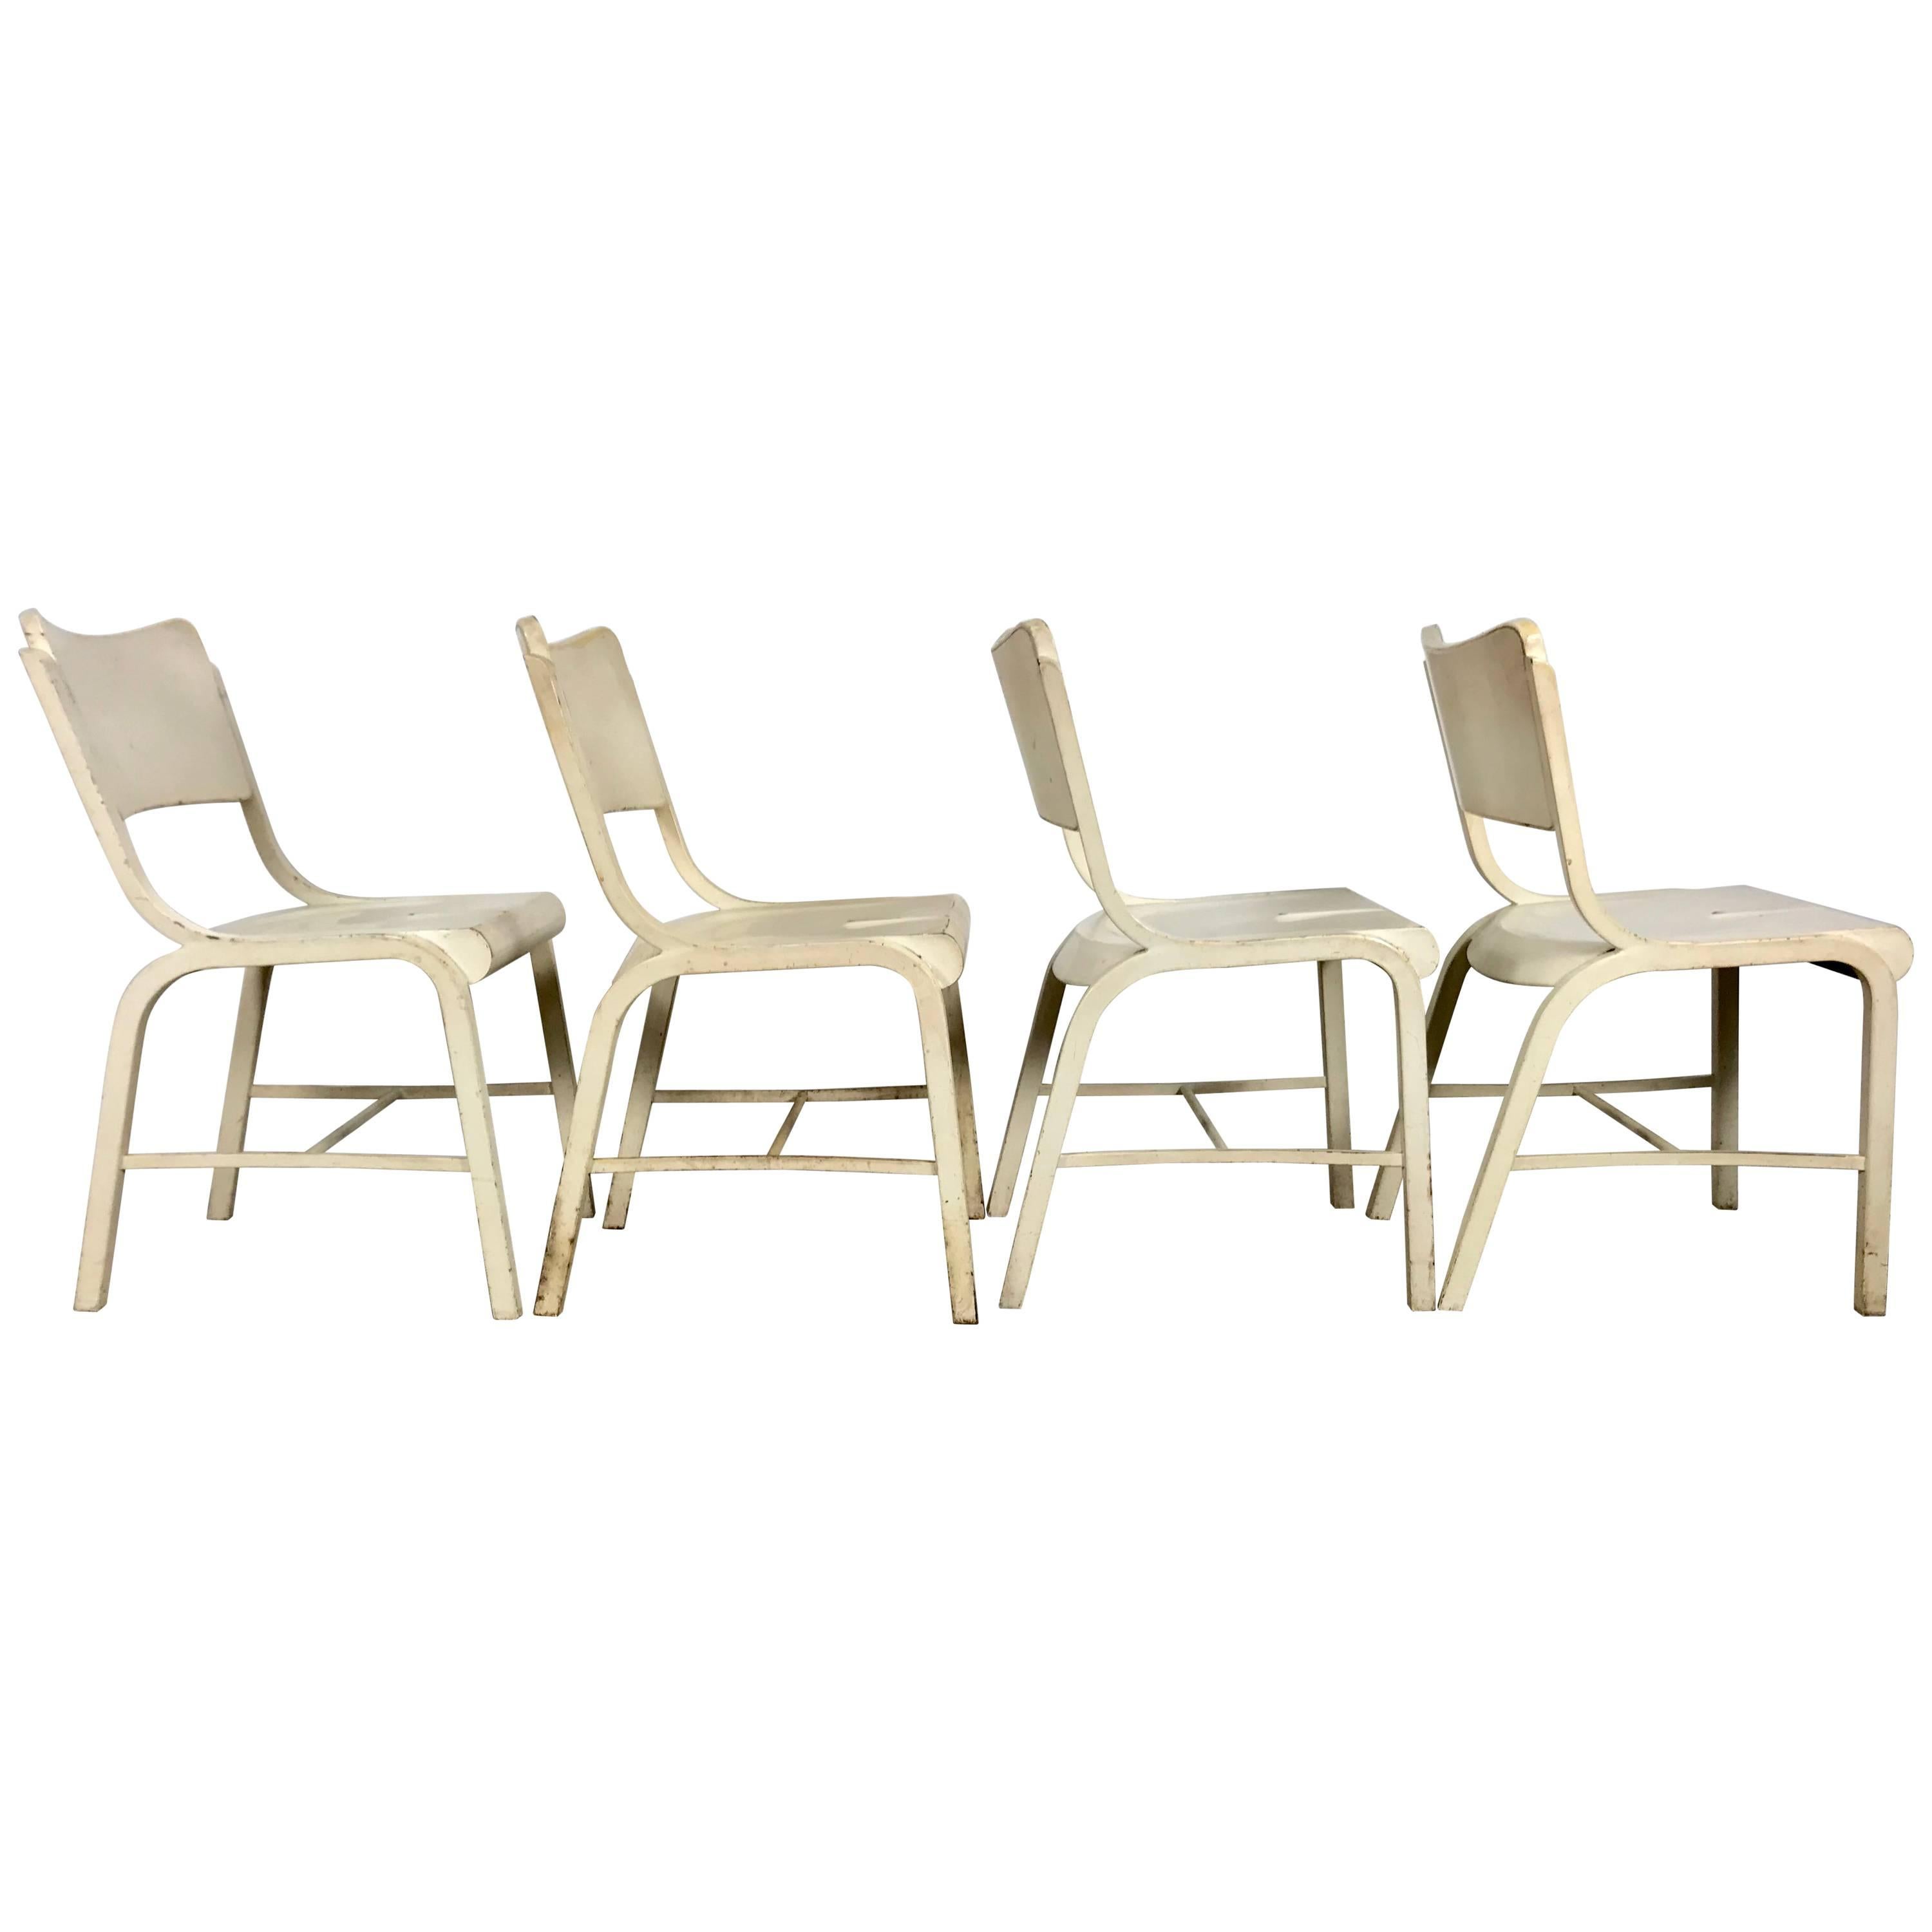 Set of Four Metal Industrial Side Chairs Manufactured by Doehler Metal Furn Co